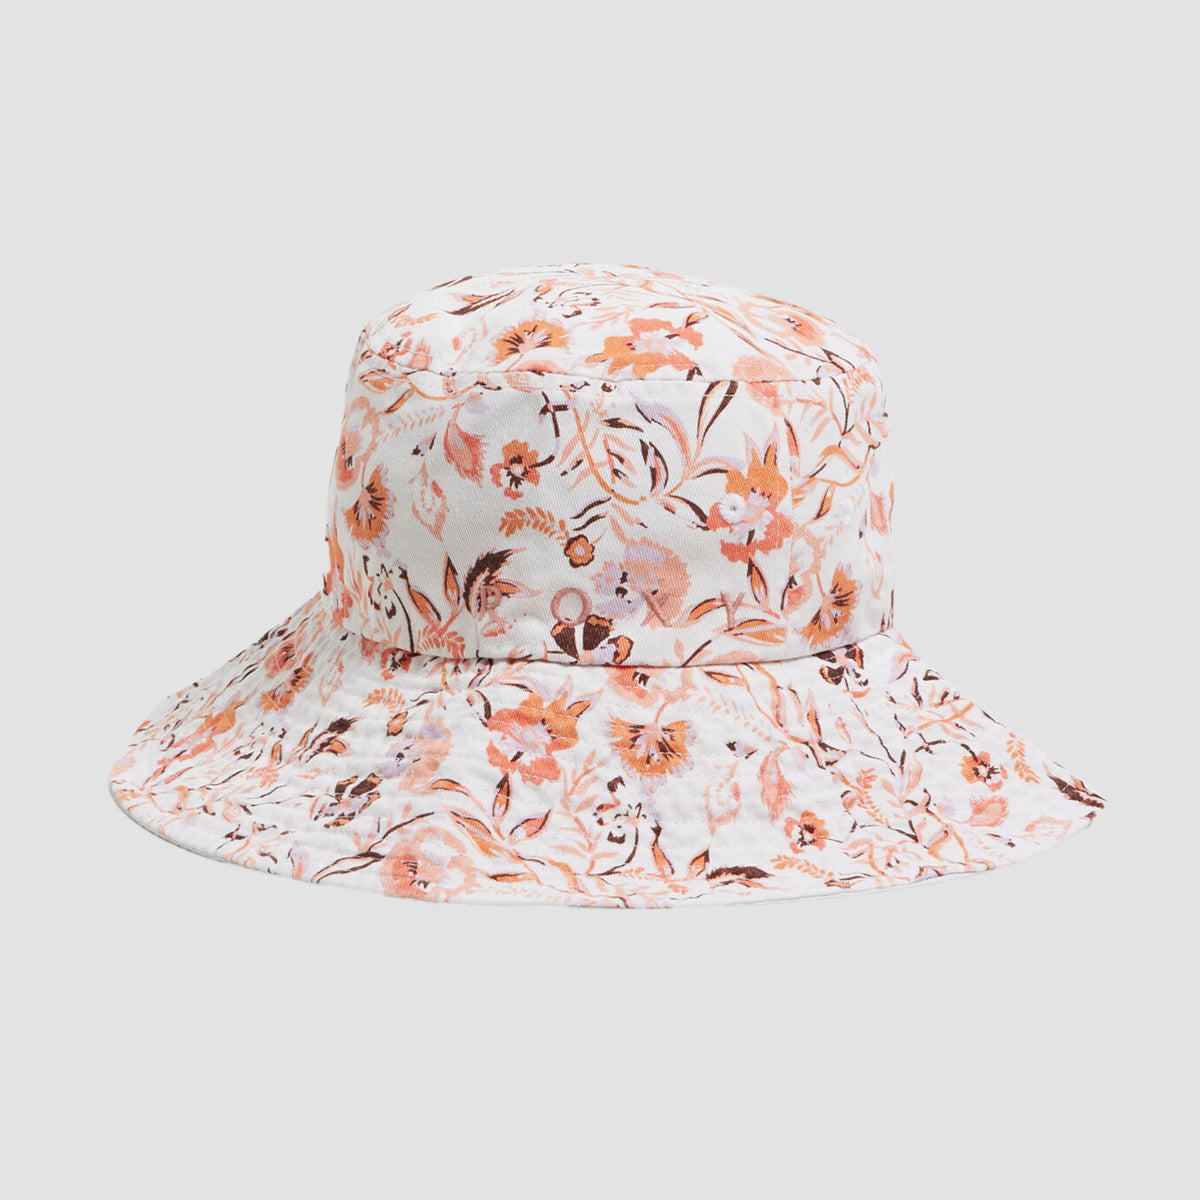 Roxy Sunset Kiss Lover In The Sun Bucket Hat Be Free Gypsy Floral Bright White - Womens